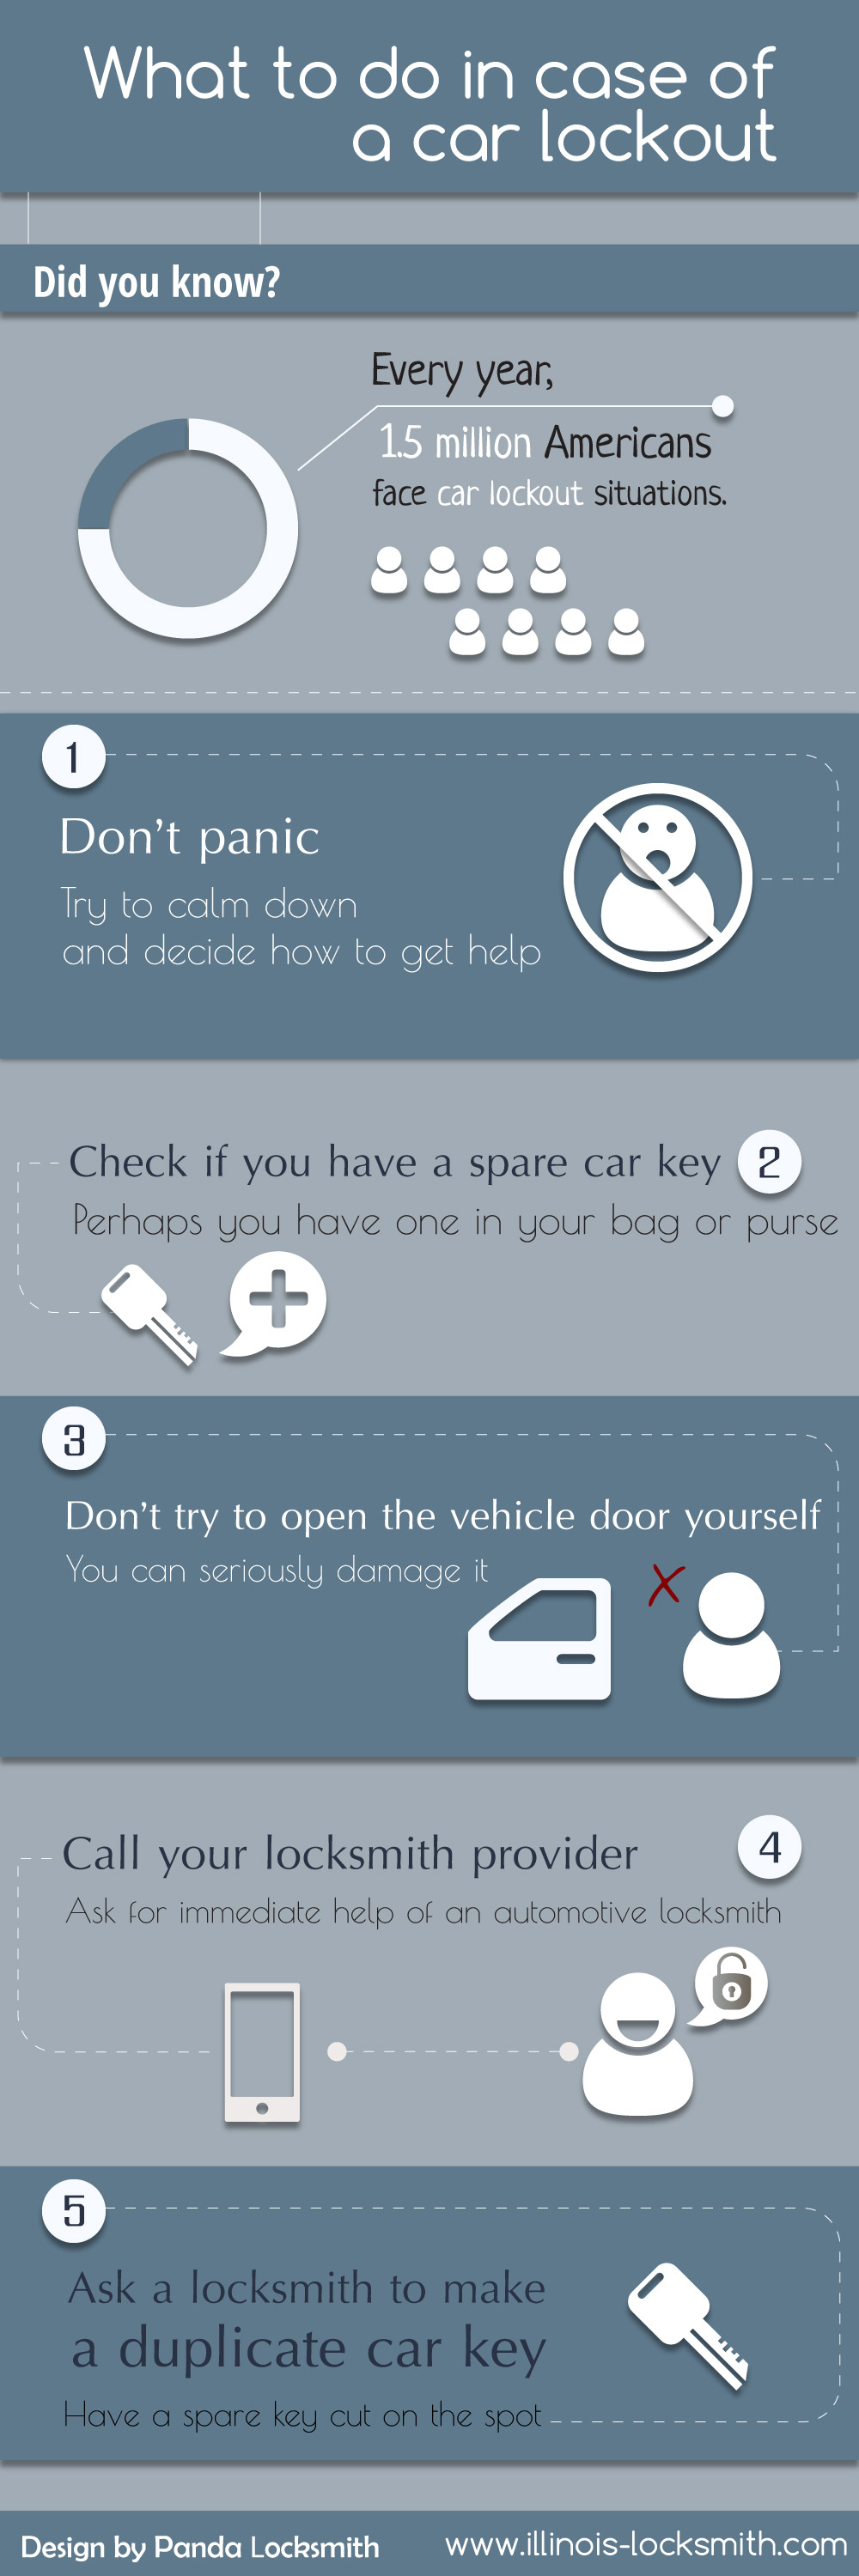 car lockout infographic